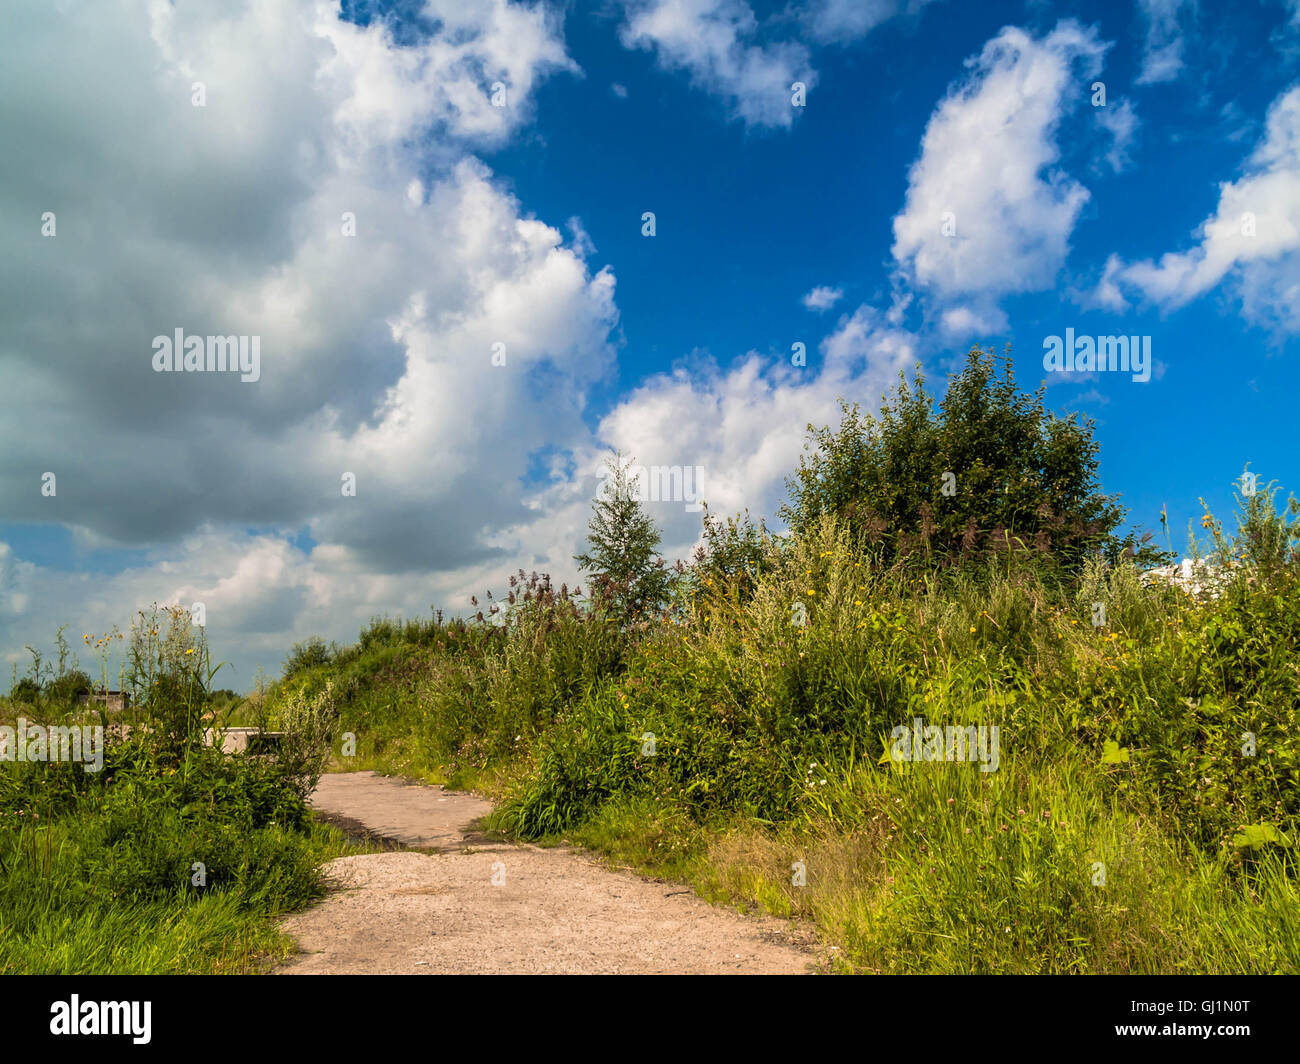 Summer landscape with dirt road runs along a hill overgrown with tall grass in the village. Hill covered with green grass agains Stock Photo